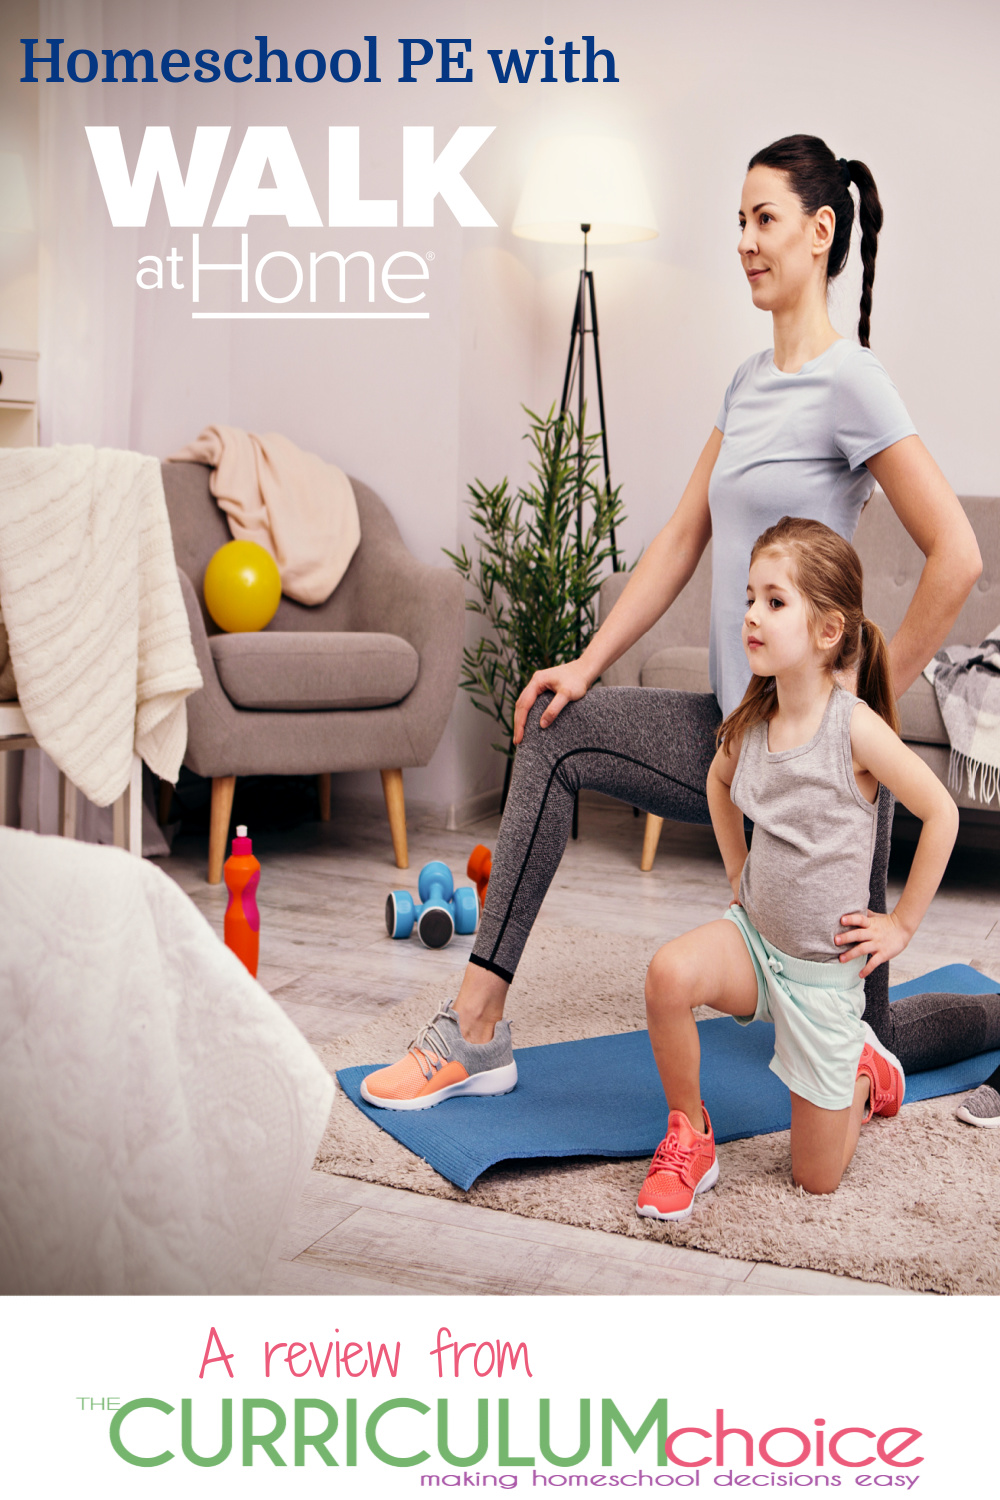 Walk at Home Homeschool PE is an easy way to get your daily workout in or to get that PE credit and it’s cheaper than a gym membership! A review from The Curriculum Choice